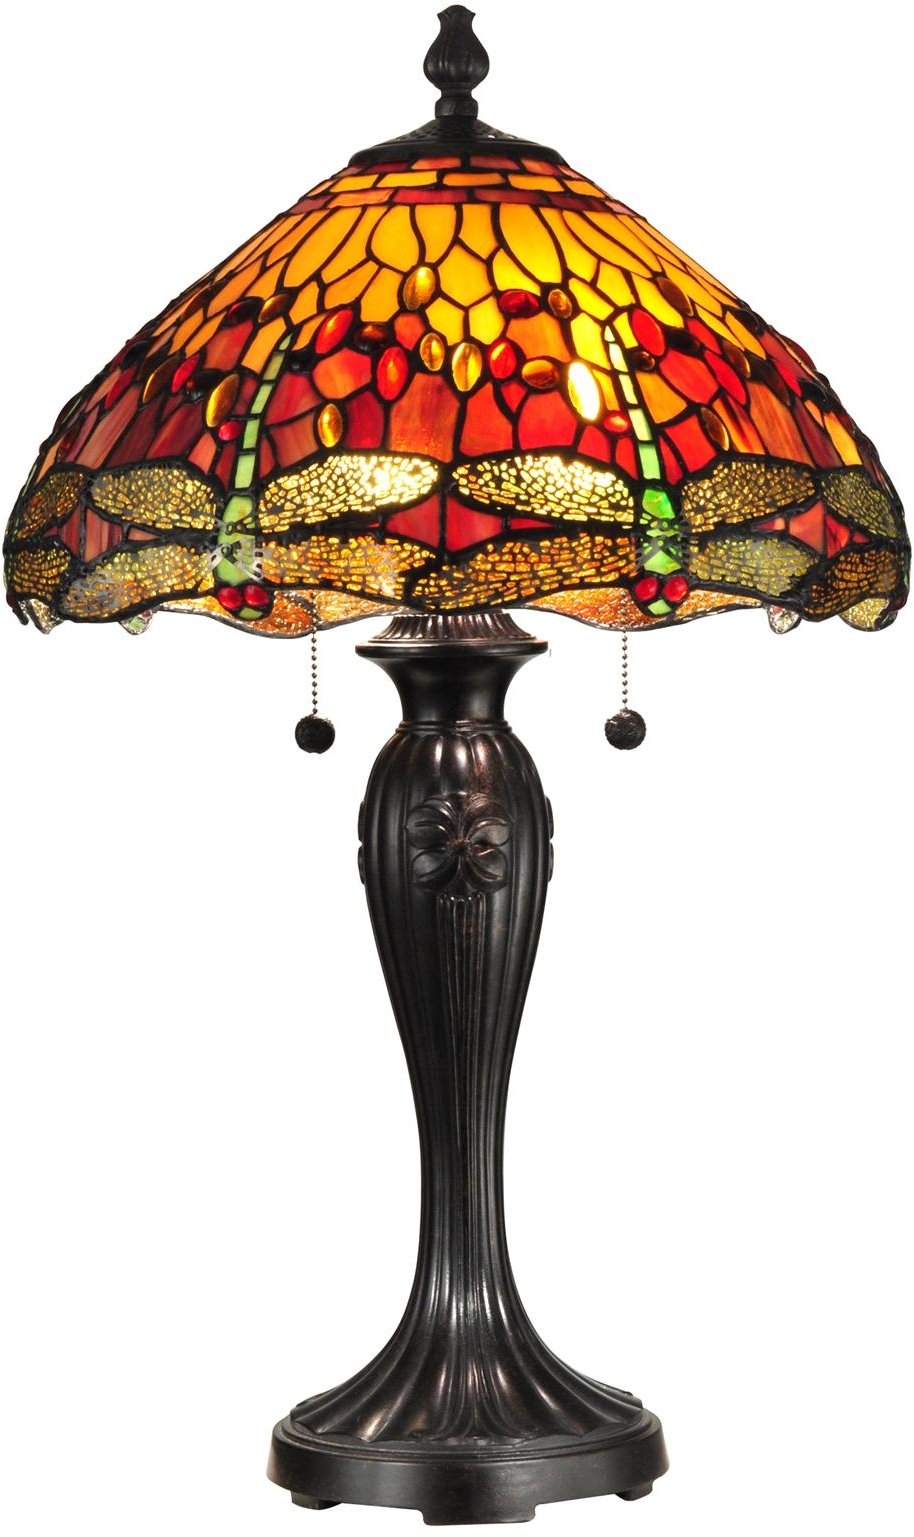 Table Lamp DALE TIFFANY REVES 2-Light Fieldstone Stone Metal Shades Included-Image 1